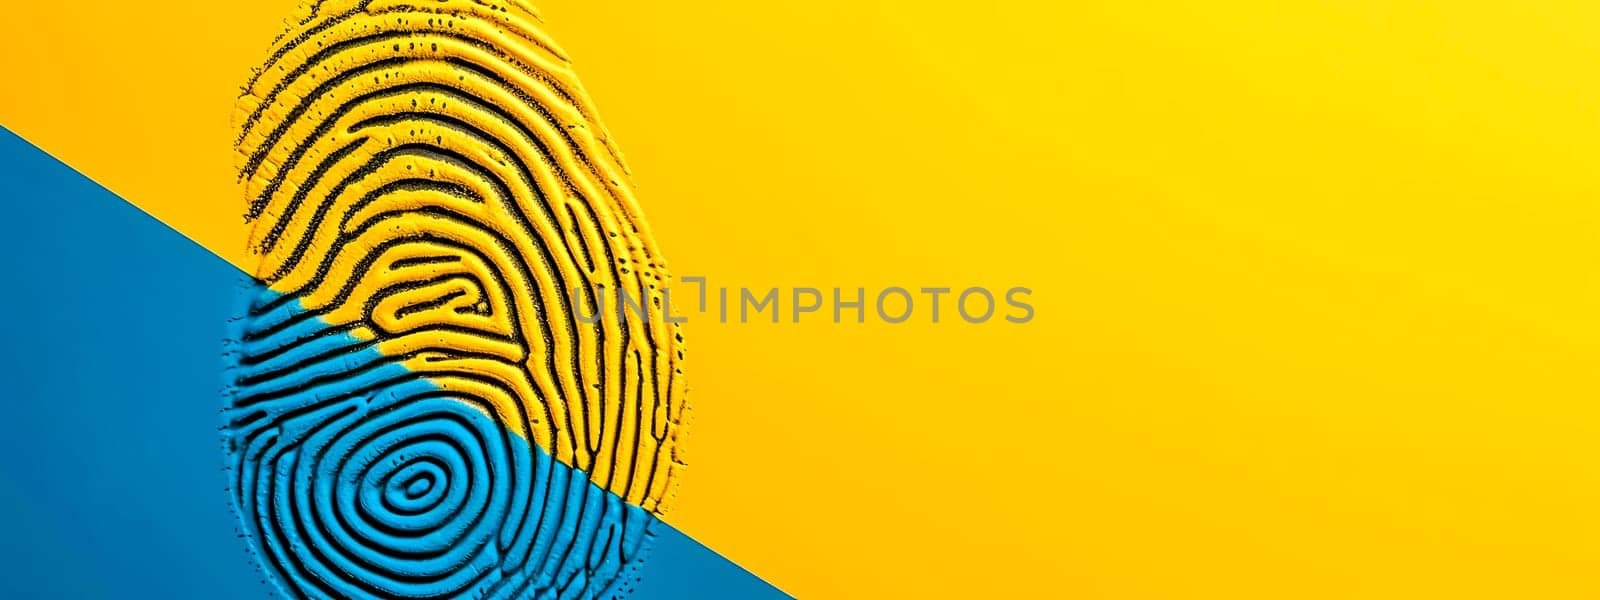 Biometric Fingerprint Identification Technology for Secure Authentication on Blue and Yellow Background by Edophoto